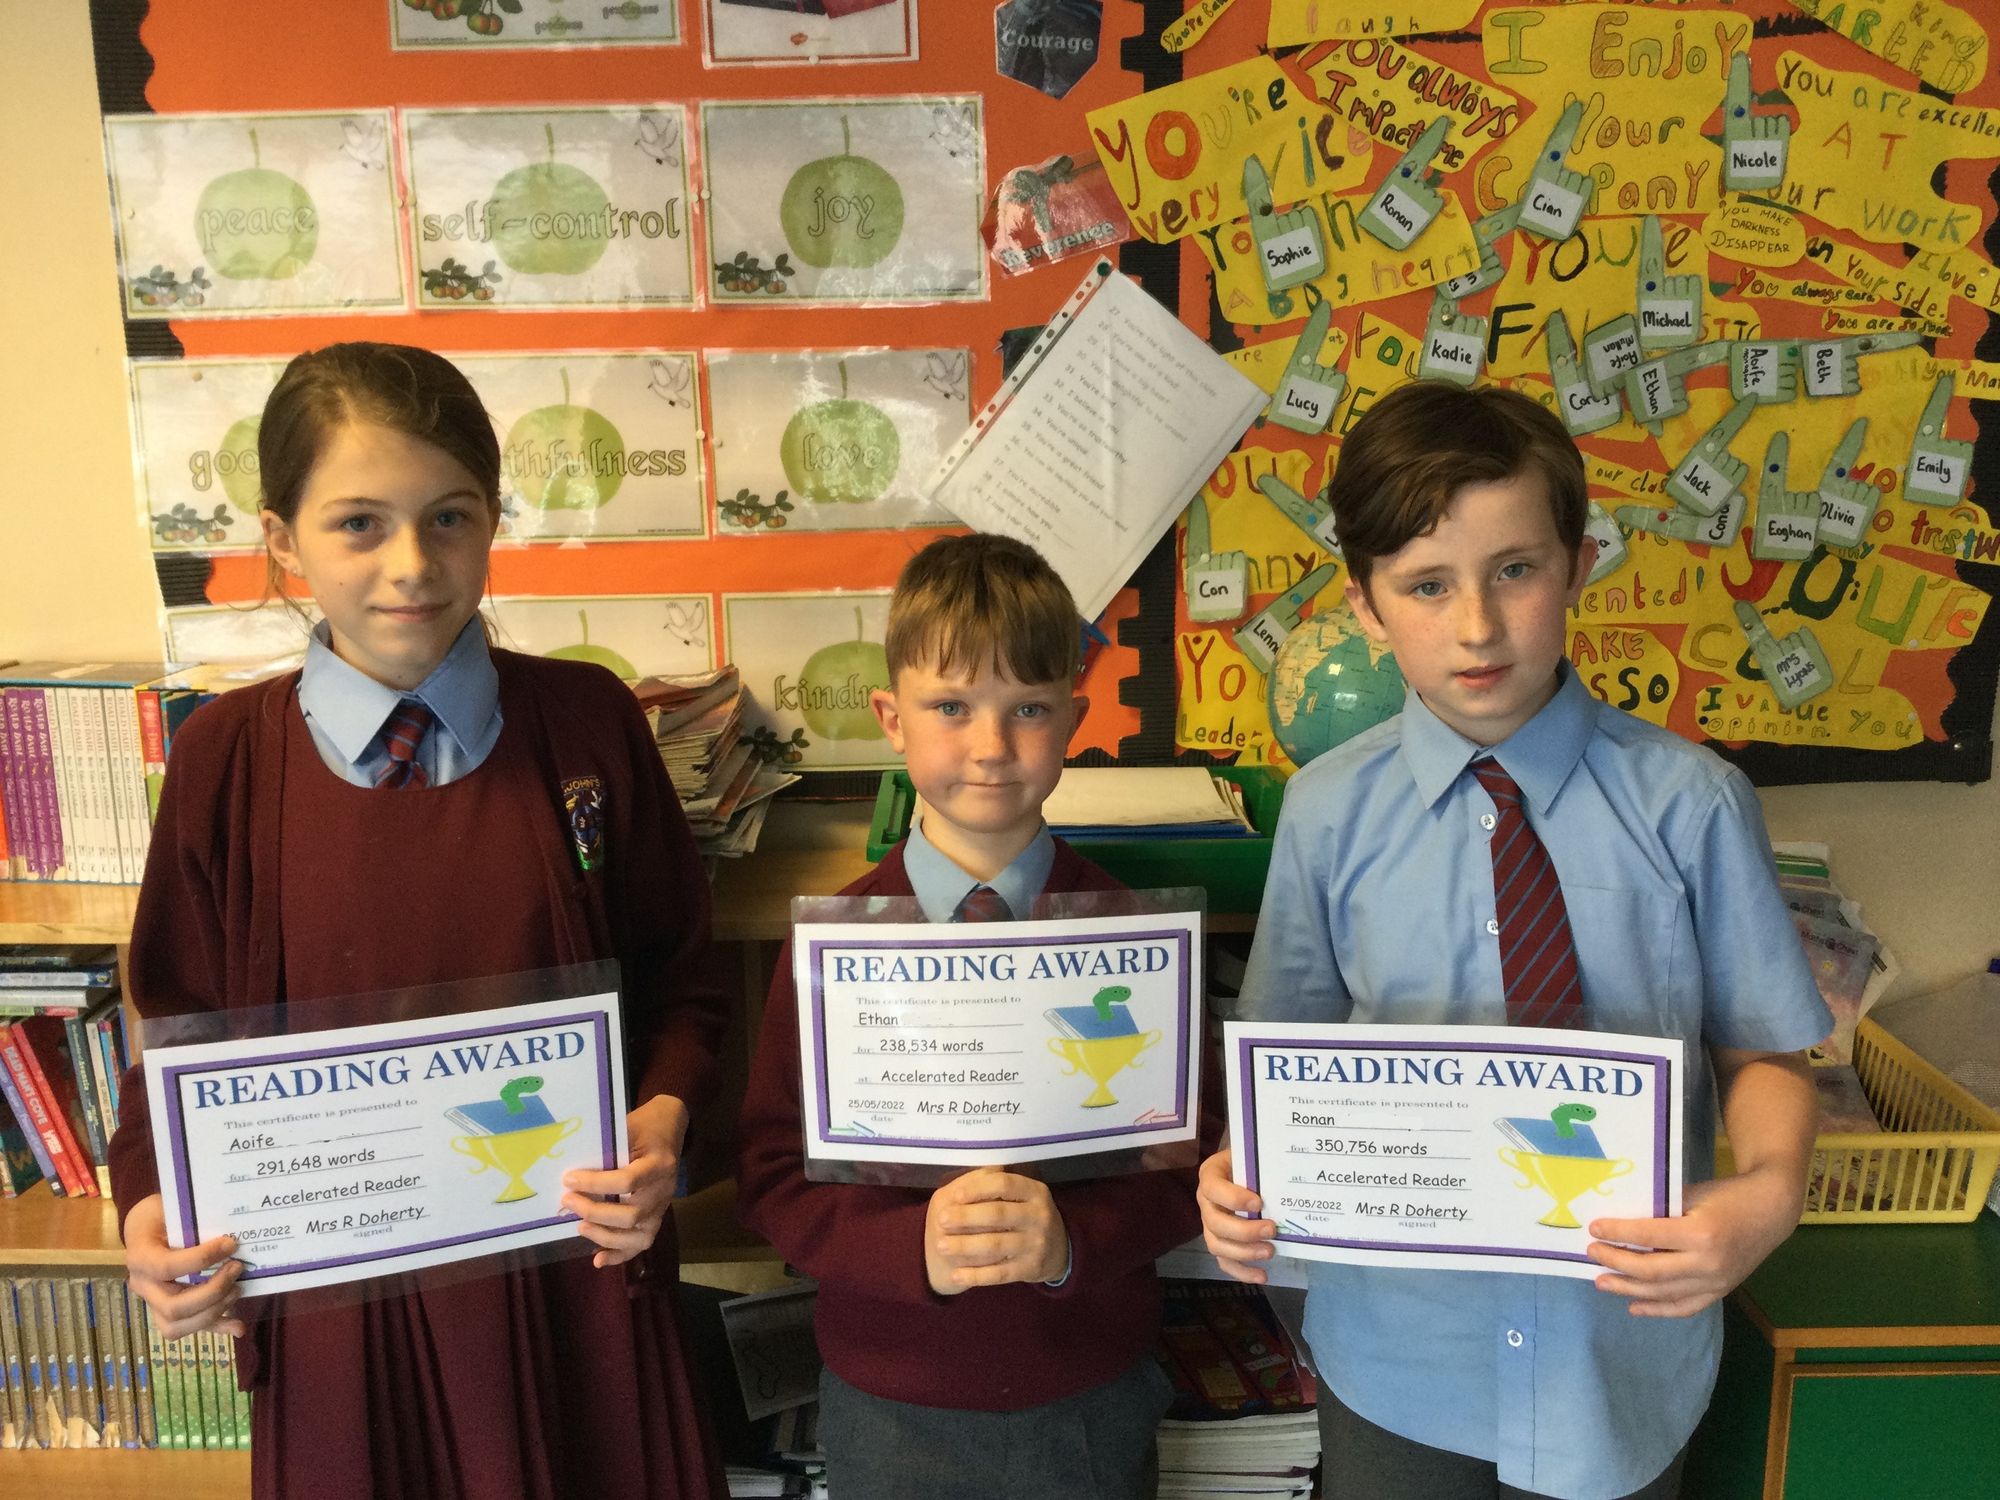 Well done to our great readers in 7A!